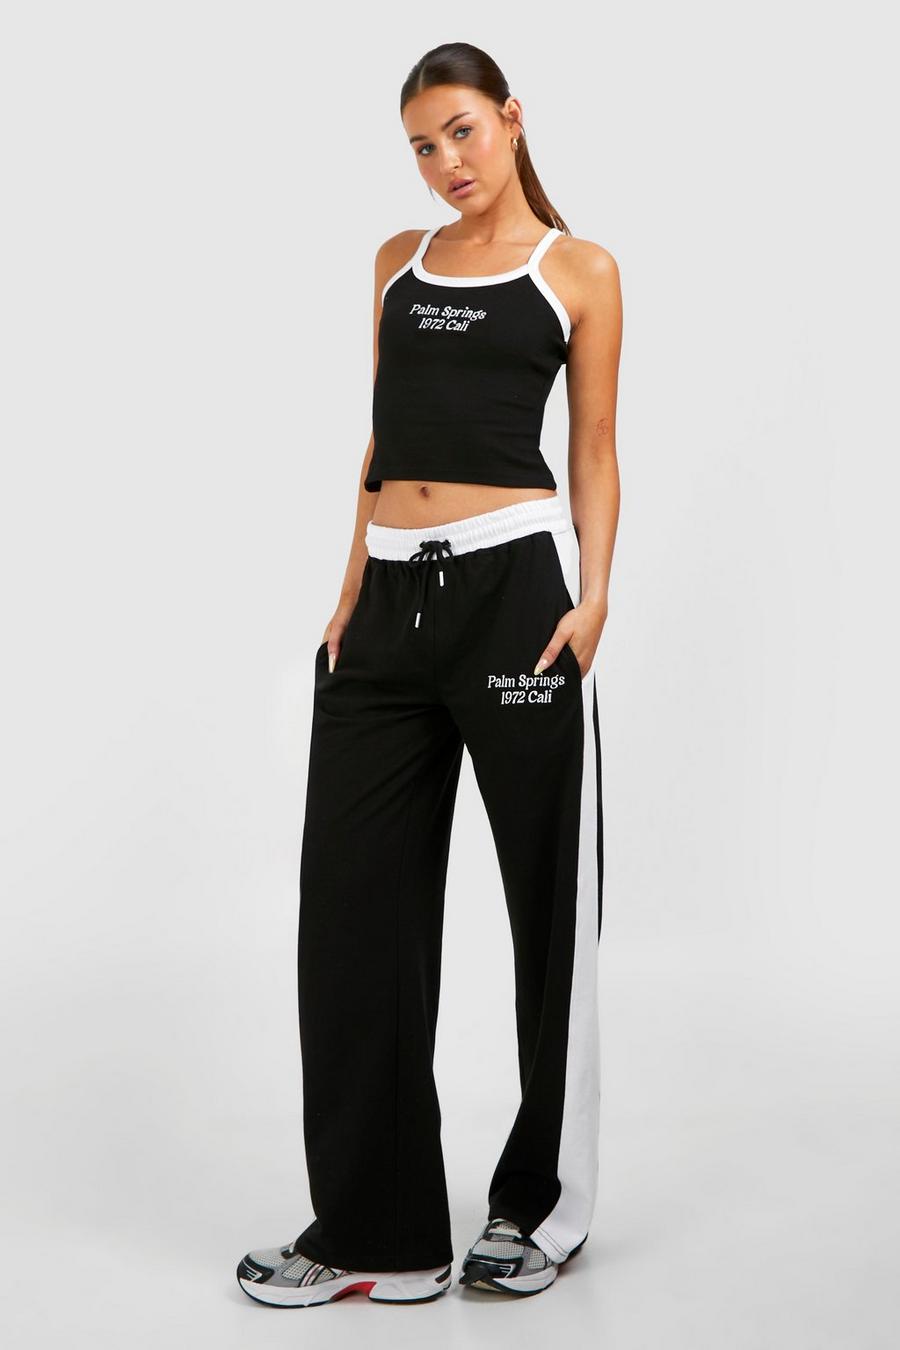 Black Palm Springs Contrast Printed Vest Top And Jogger Set